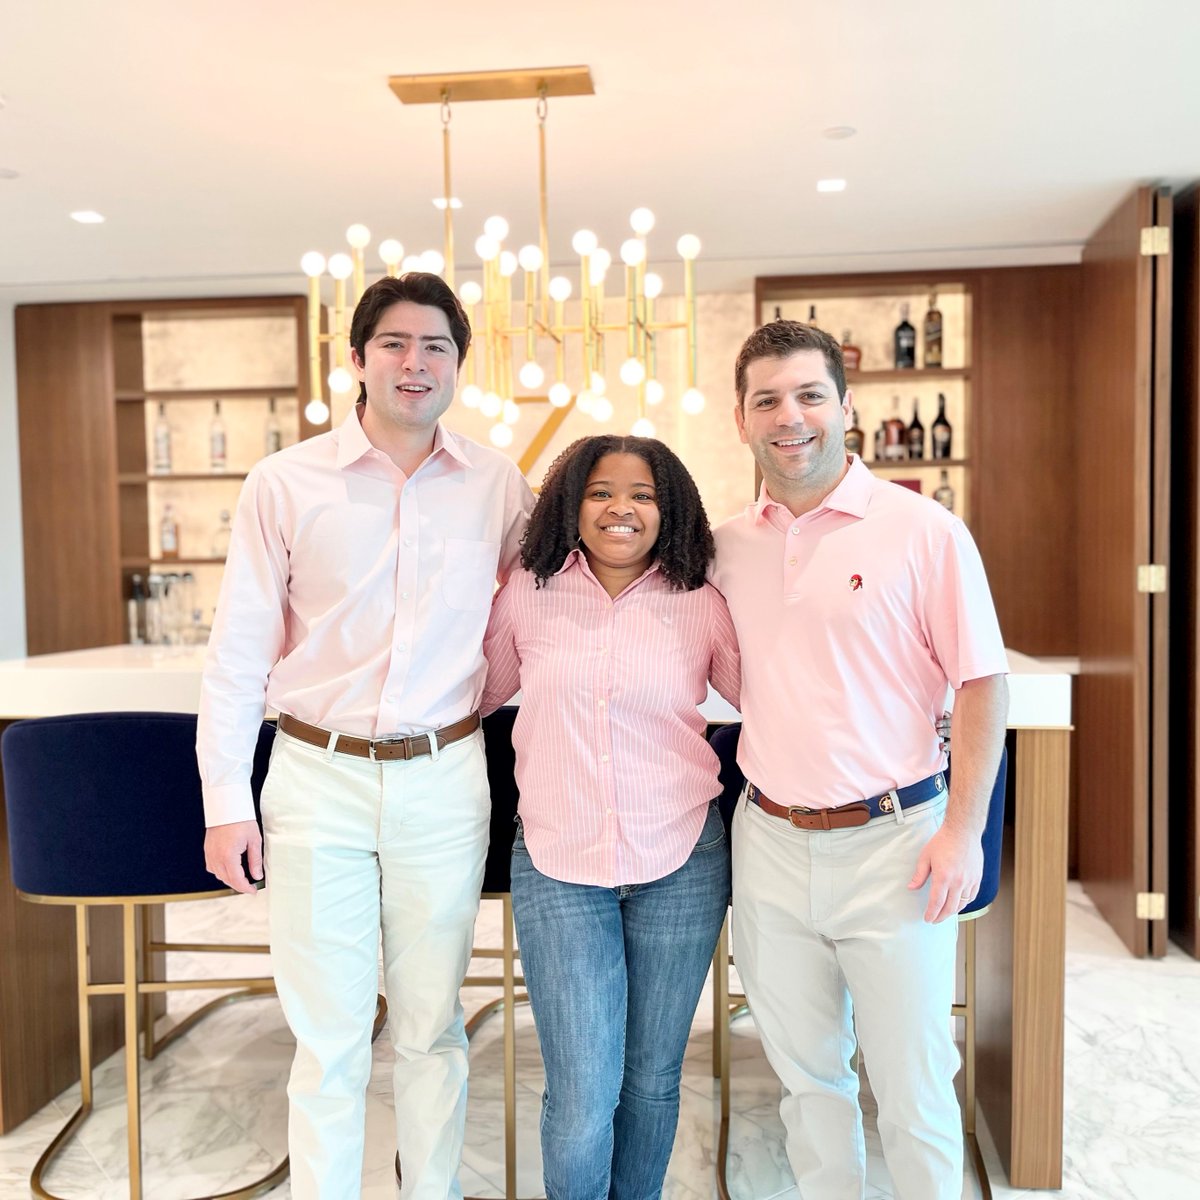 Yes, #OnWednesdaysWeWearPink!

Our law clerks joined trial attorney, Lamar Delong for an unofficial tradition. Why not look great when delivering good news to our wonderful clients? See what else we've been up to lately: bit.ly/2BjcAnb